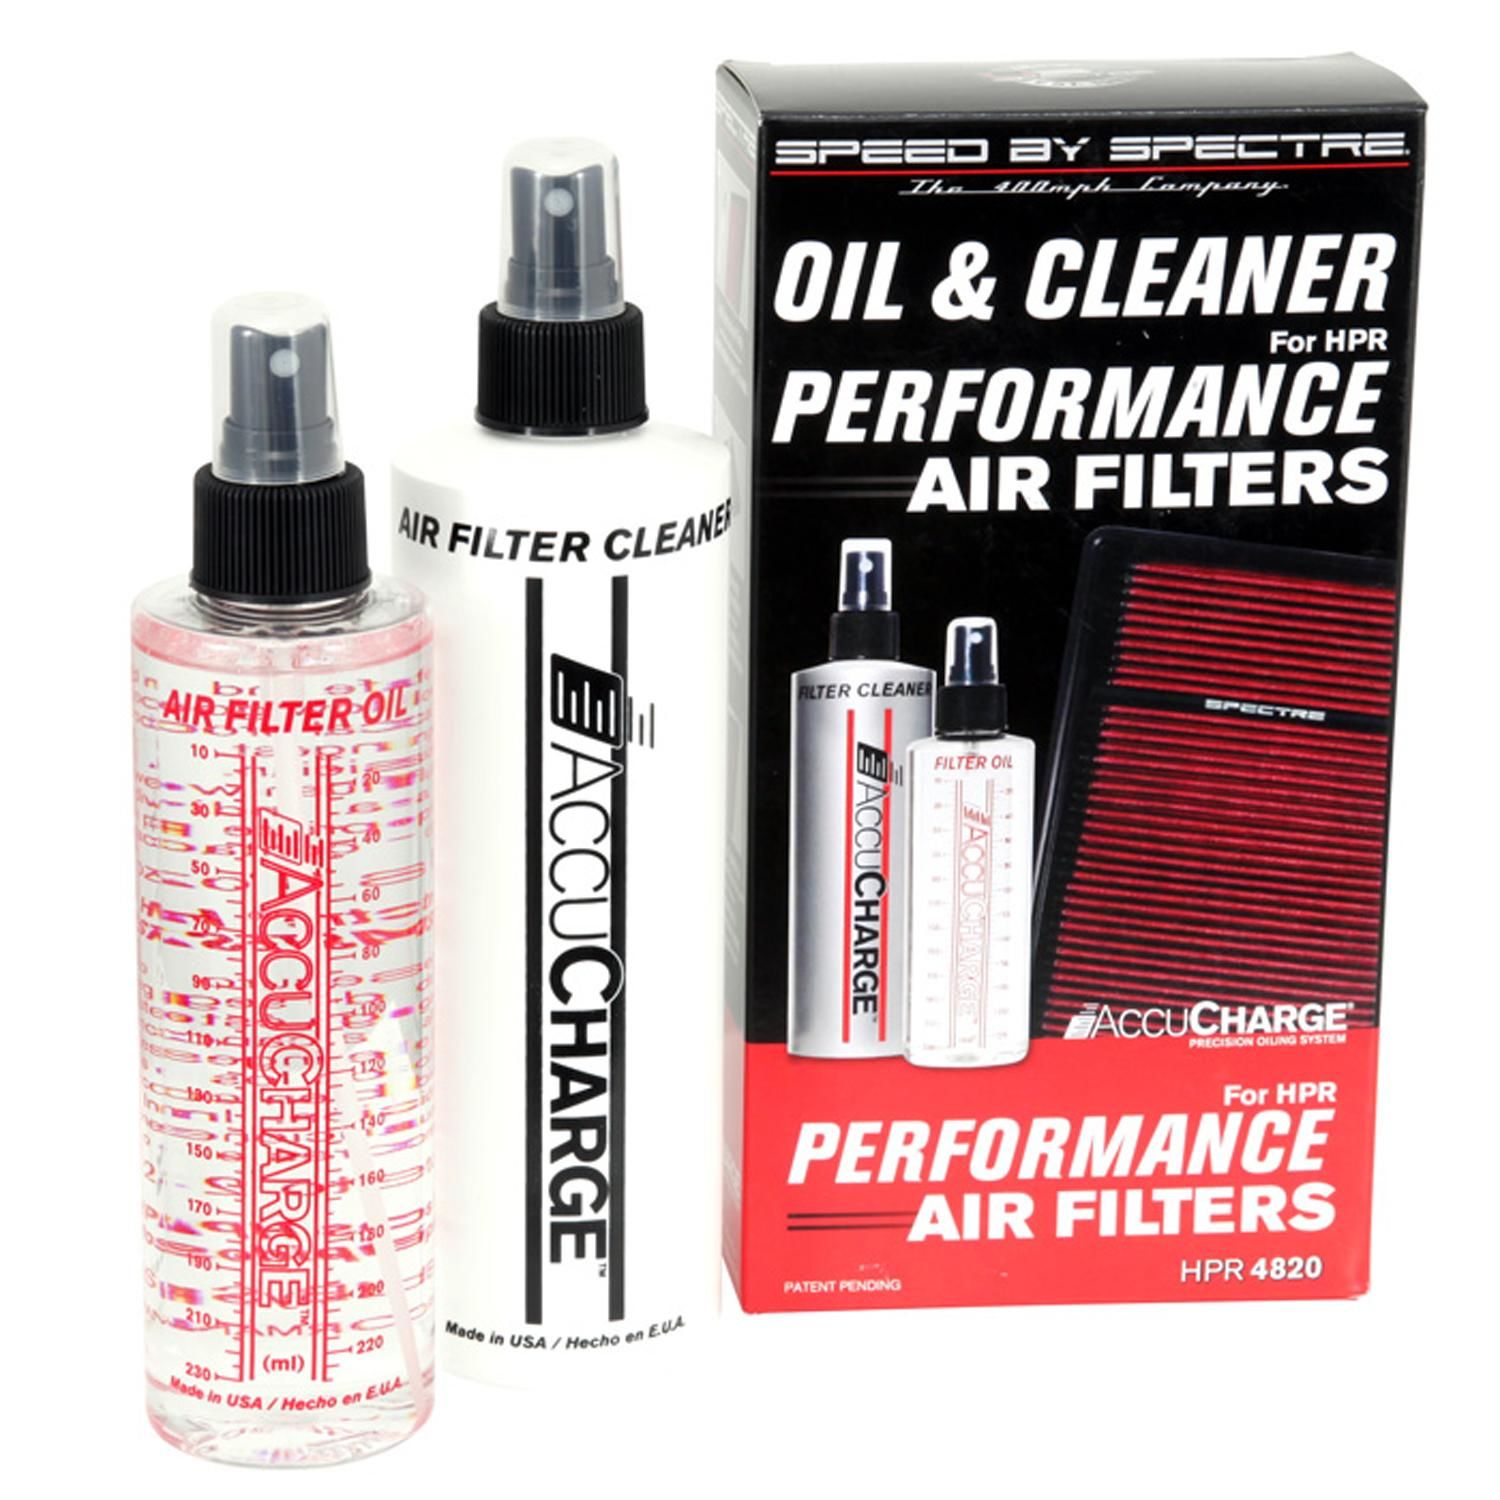 K&N Aerosol Air Filter Recharger and Cleaning Kit